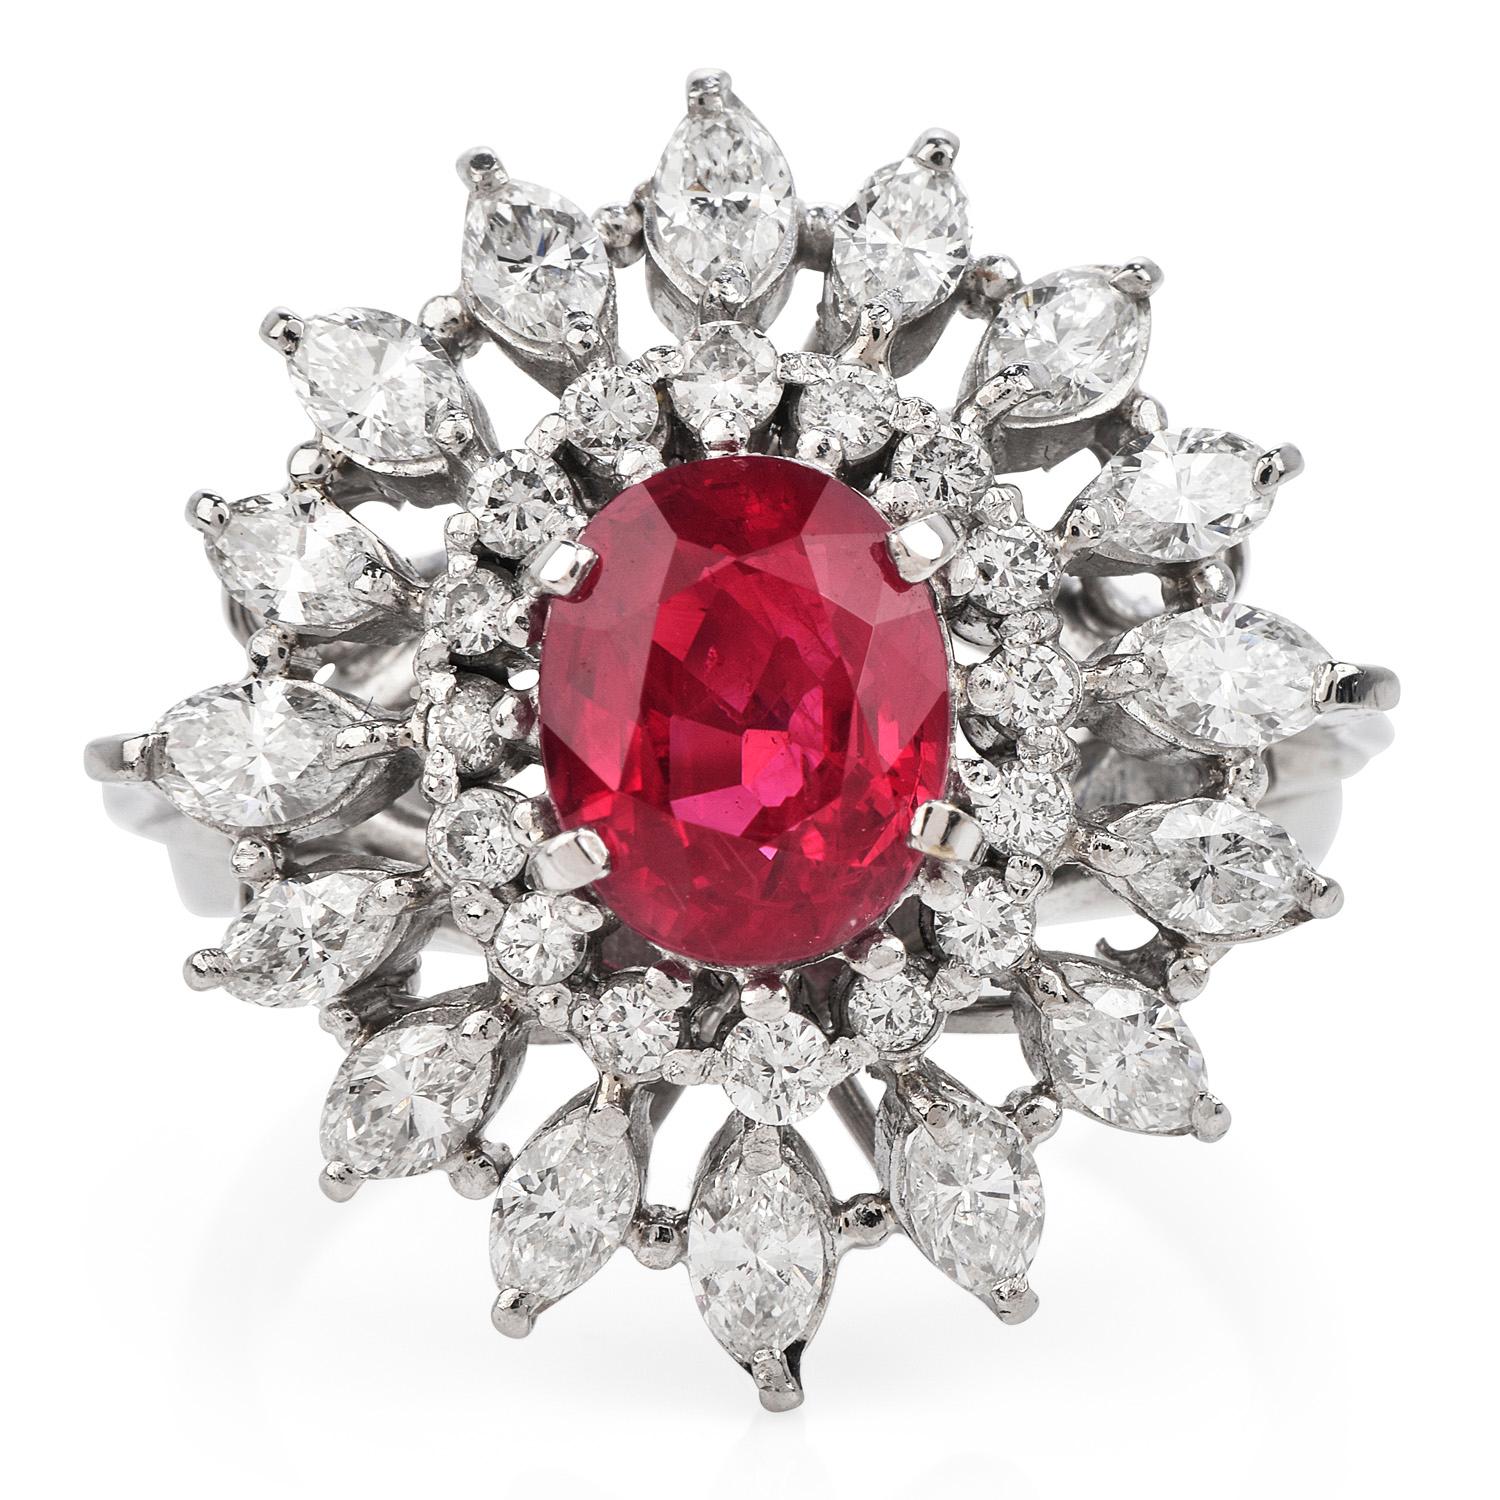 Retro-inspired Starburst Cocktail Ring is Stunning

Features GIA Genuine Ruby and Diamonds expertly crafted in solid Platinum and an approximate total weight of 10.89 grams.

The exquisite center stone is an oval brilliant-cut Natural Corundum Ruby